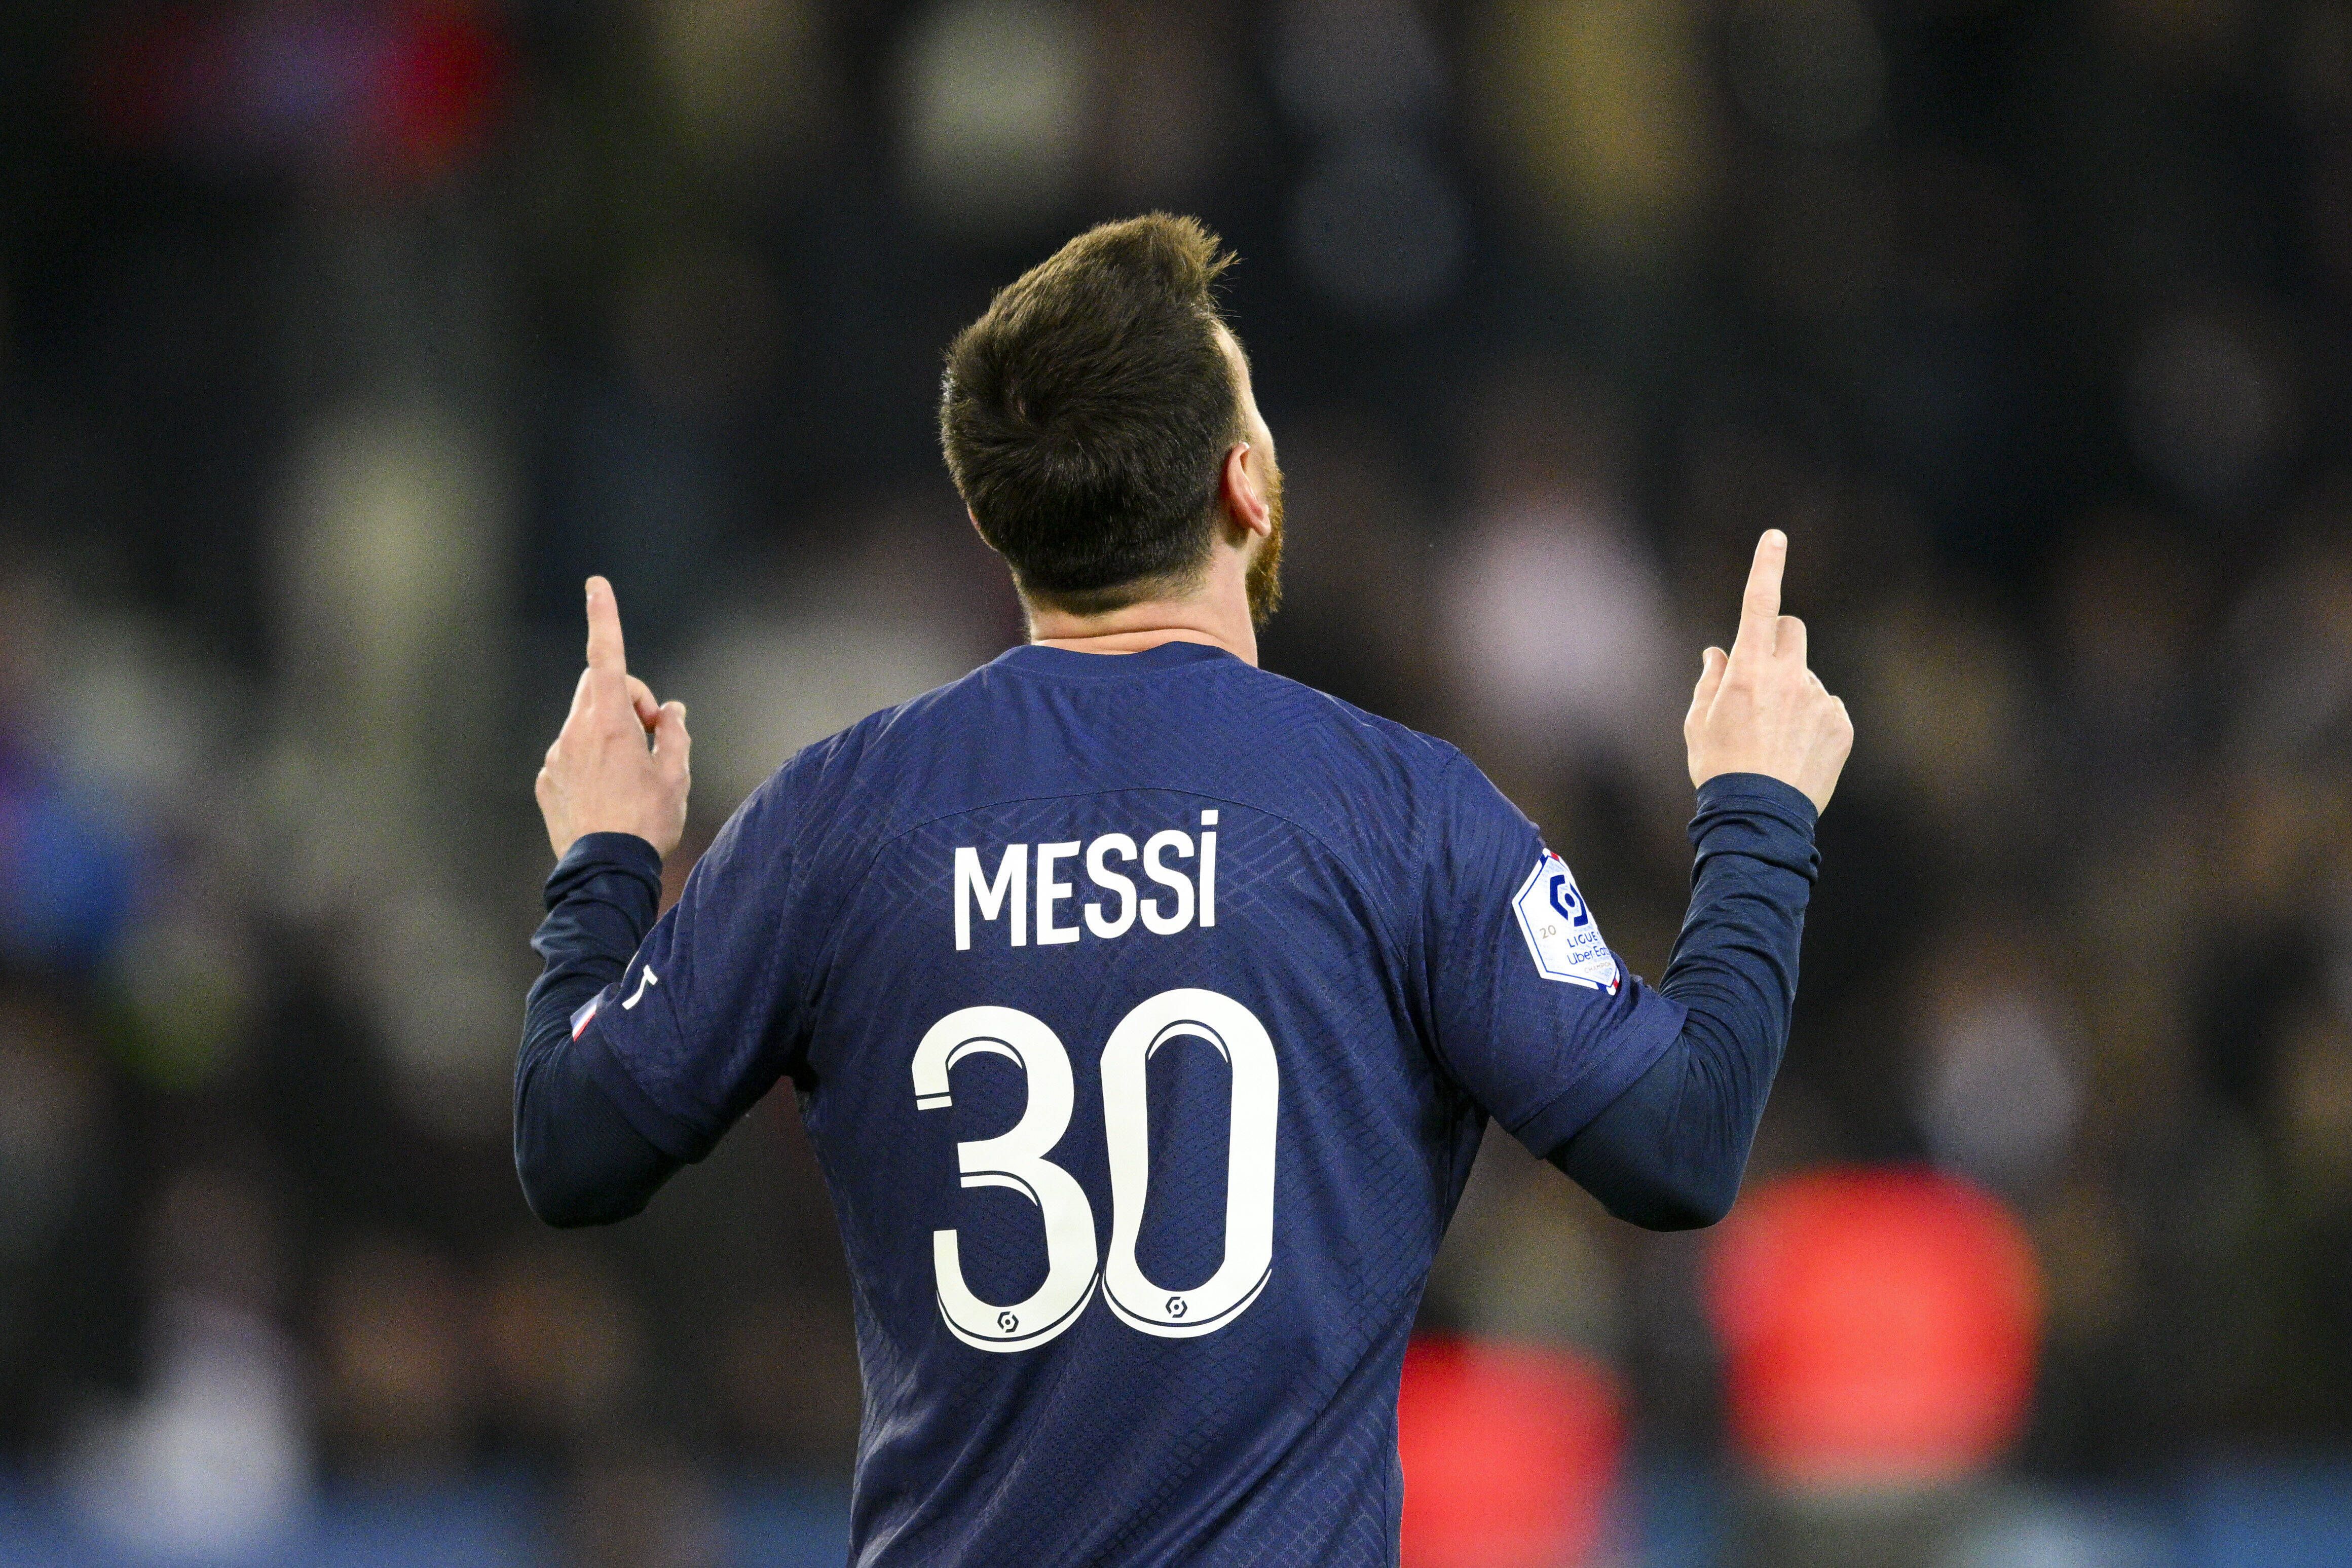 Lionel Messi has reached double figures in goals and assists this season for PSG